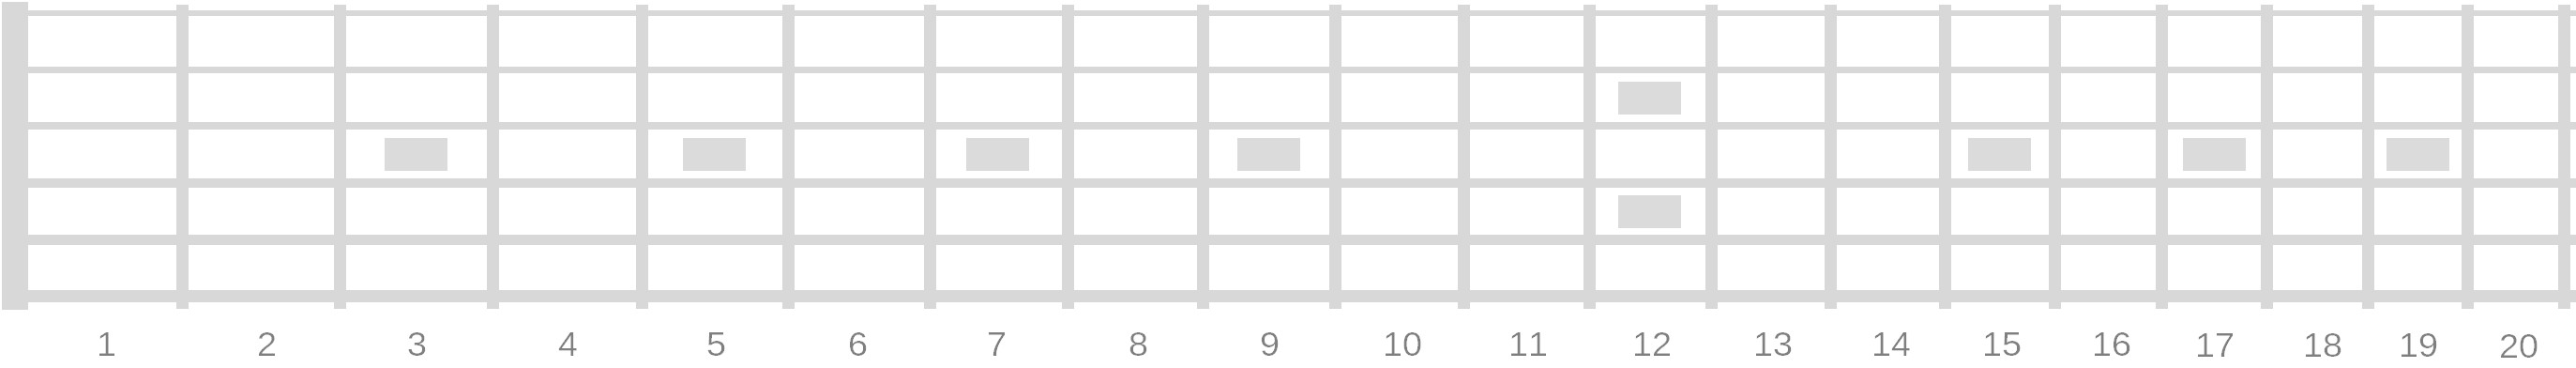 Blank Bass Fretboard Diagram Printable Blank Fretboard Diagrams Right and Left Handed